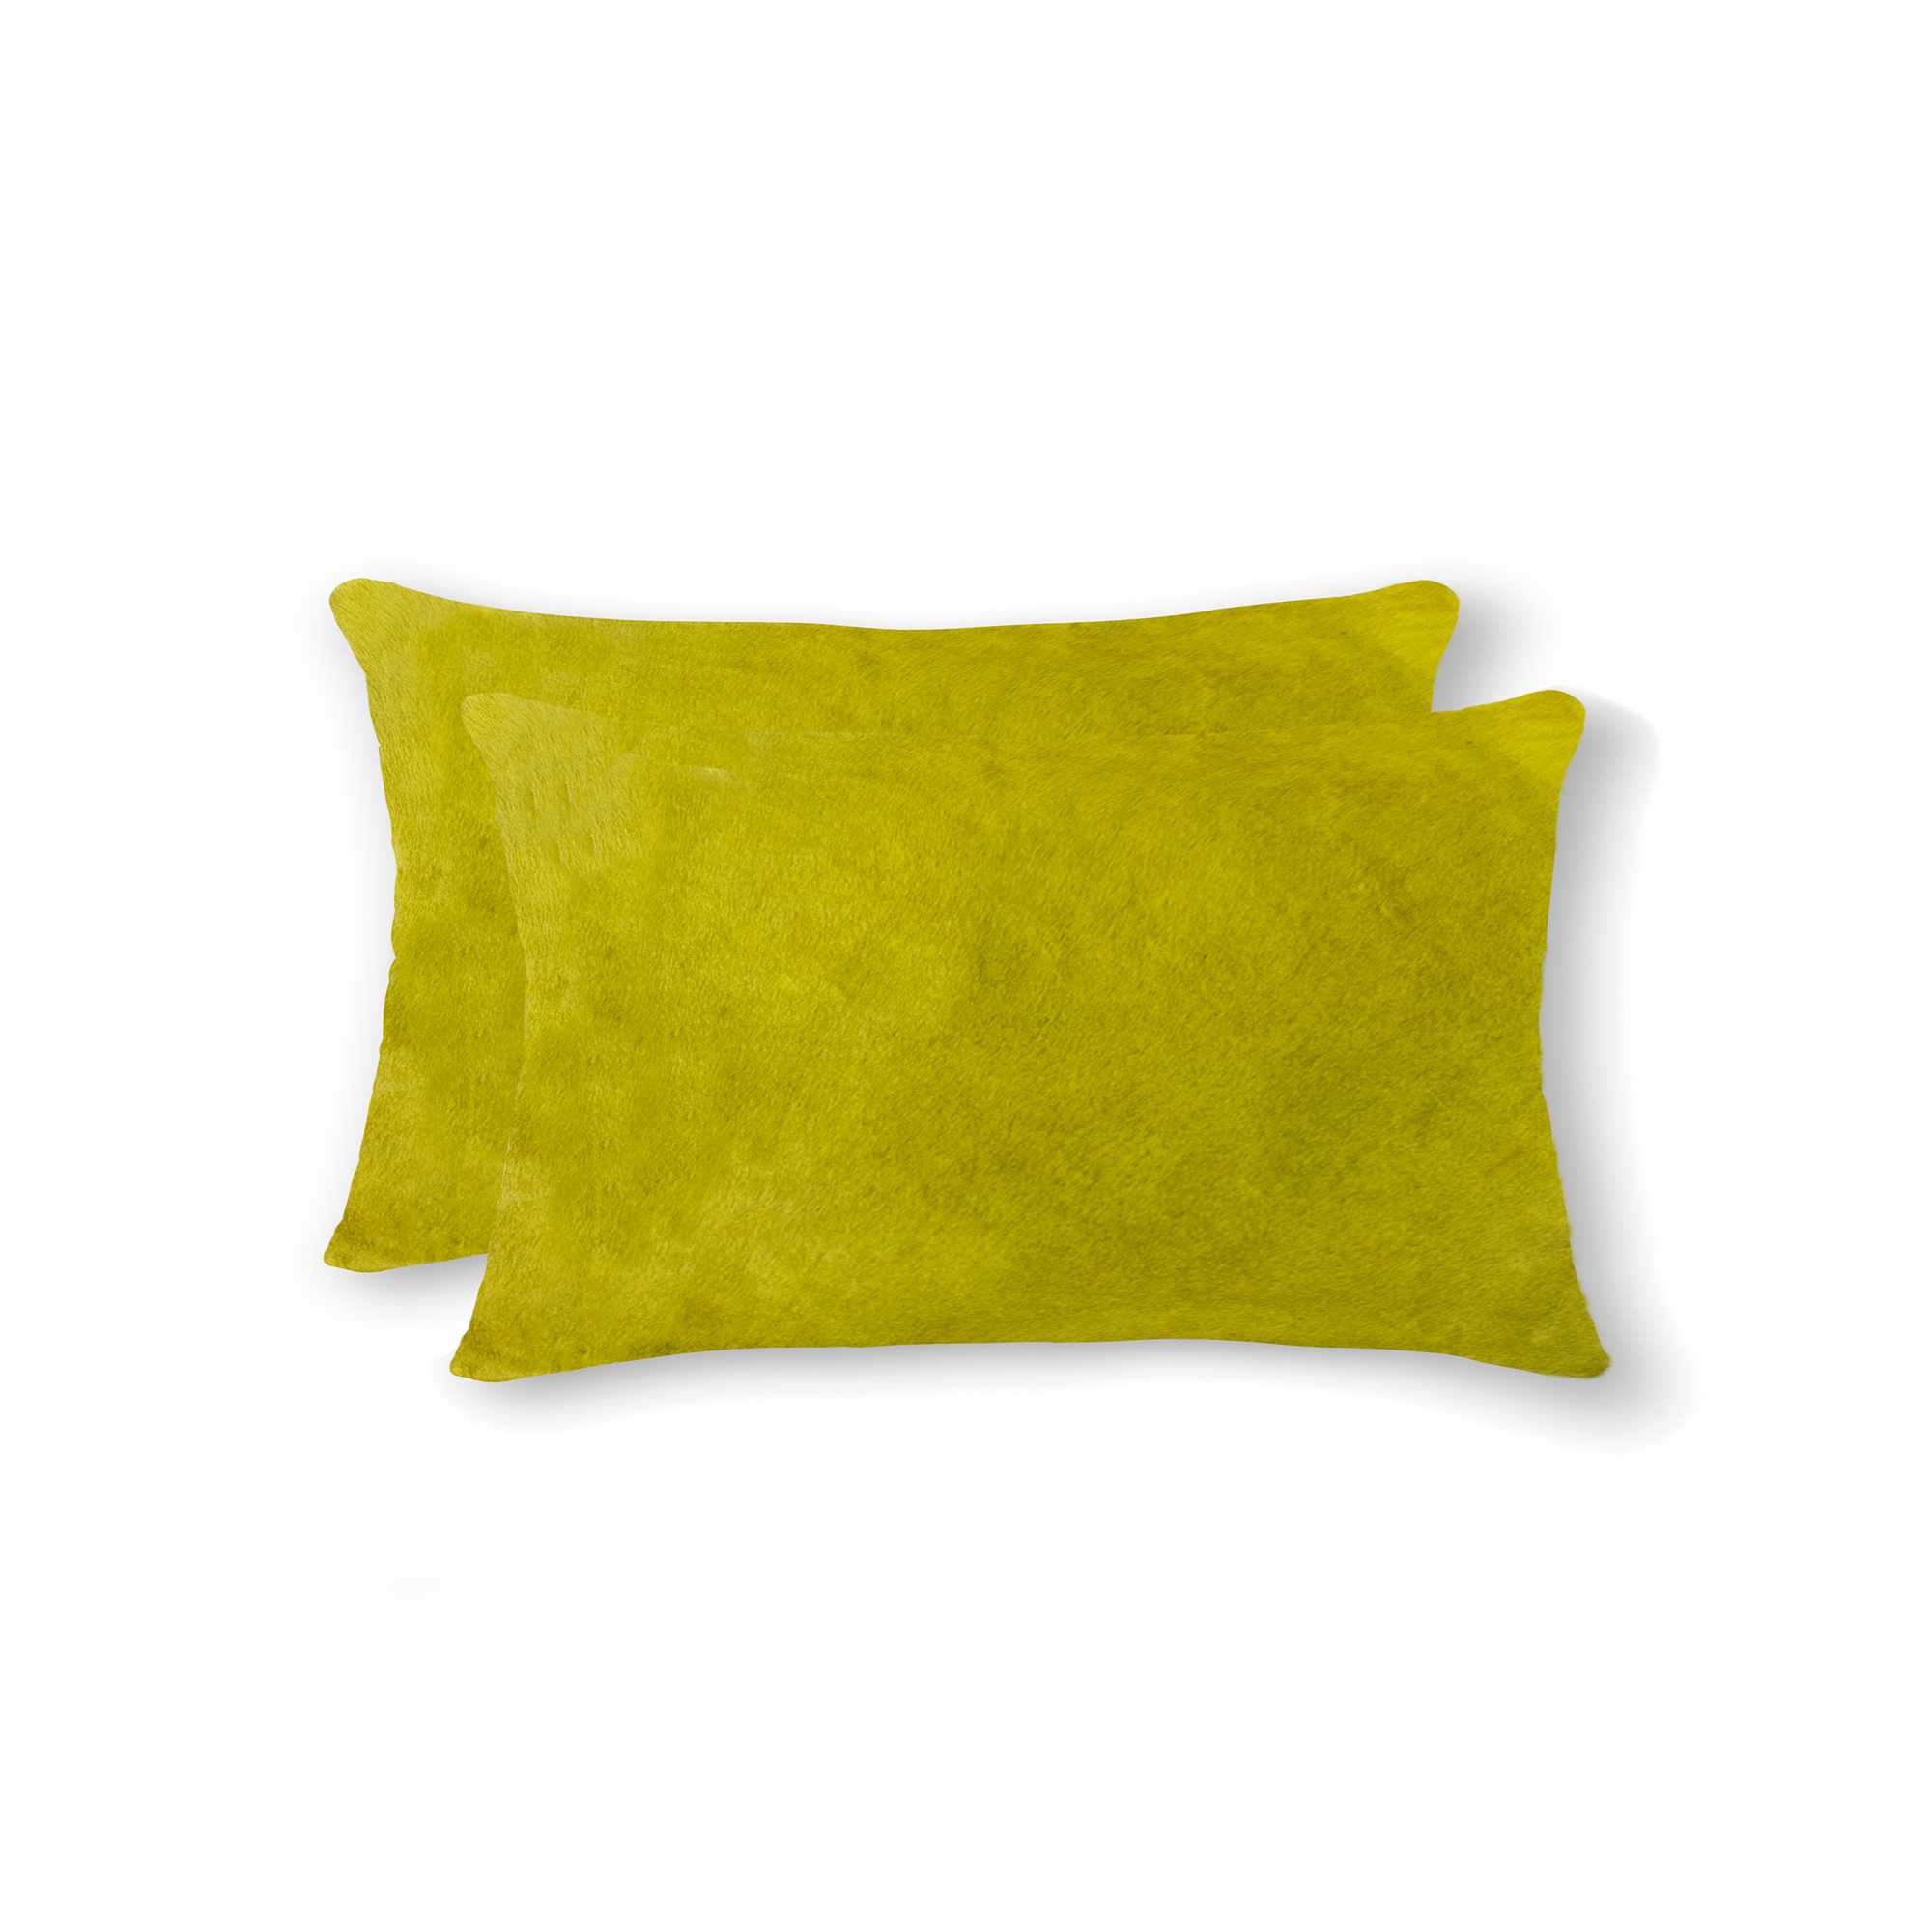 12" x 20" x 5" Yellow, Cowhide - Pillow 2-Pack